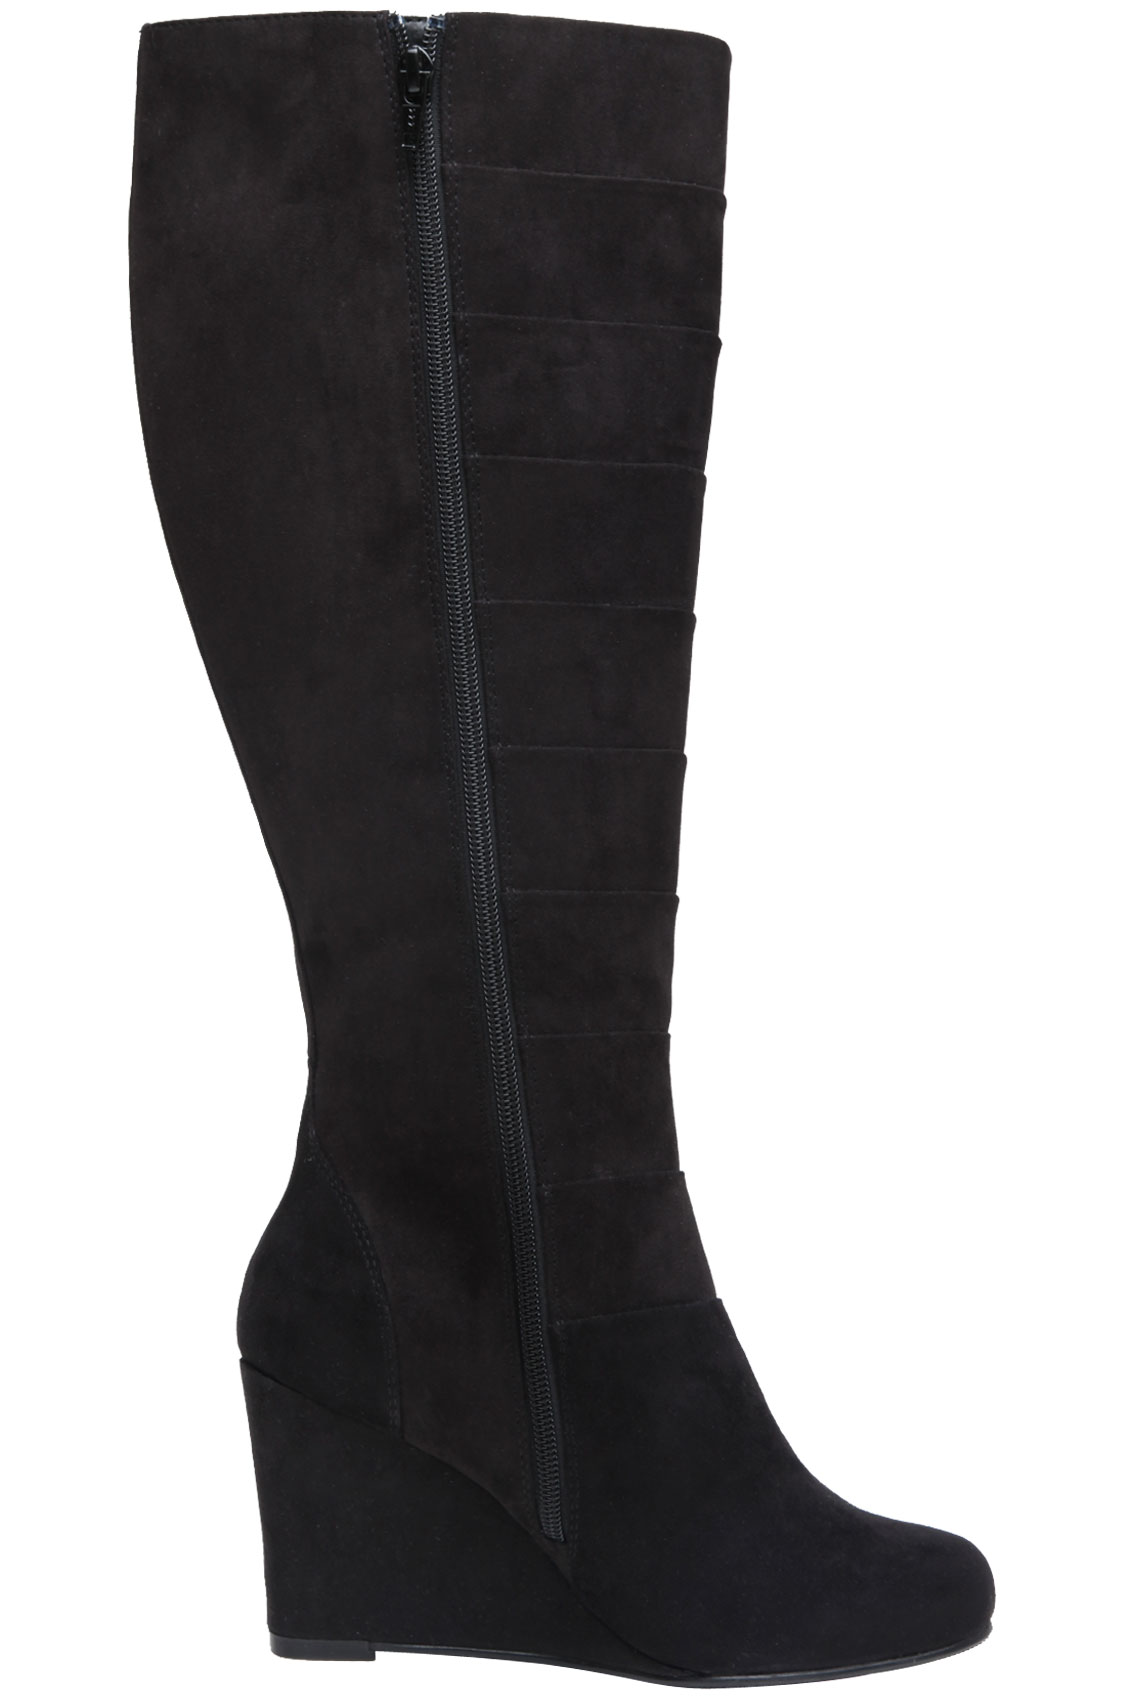 Black Suedette Wedge Knee High Boots With Cross Hatch Detail in EEE Fi ...